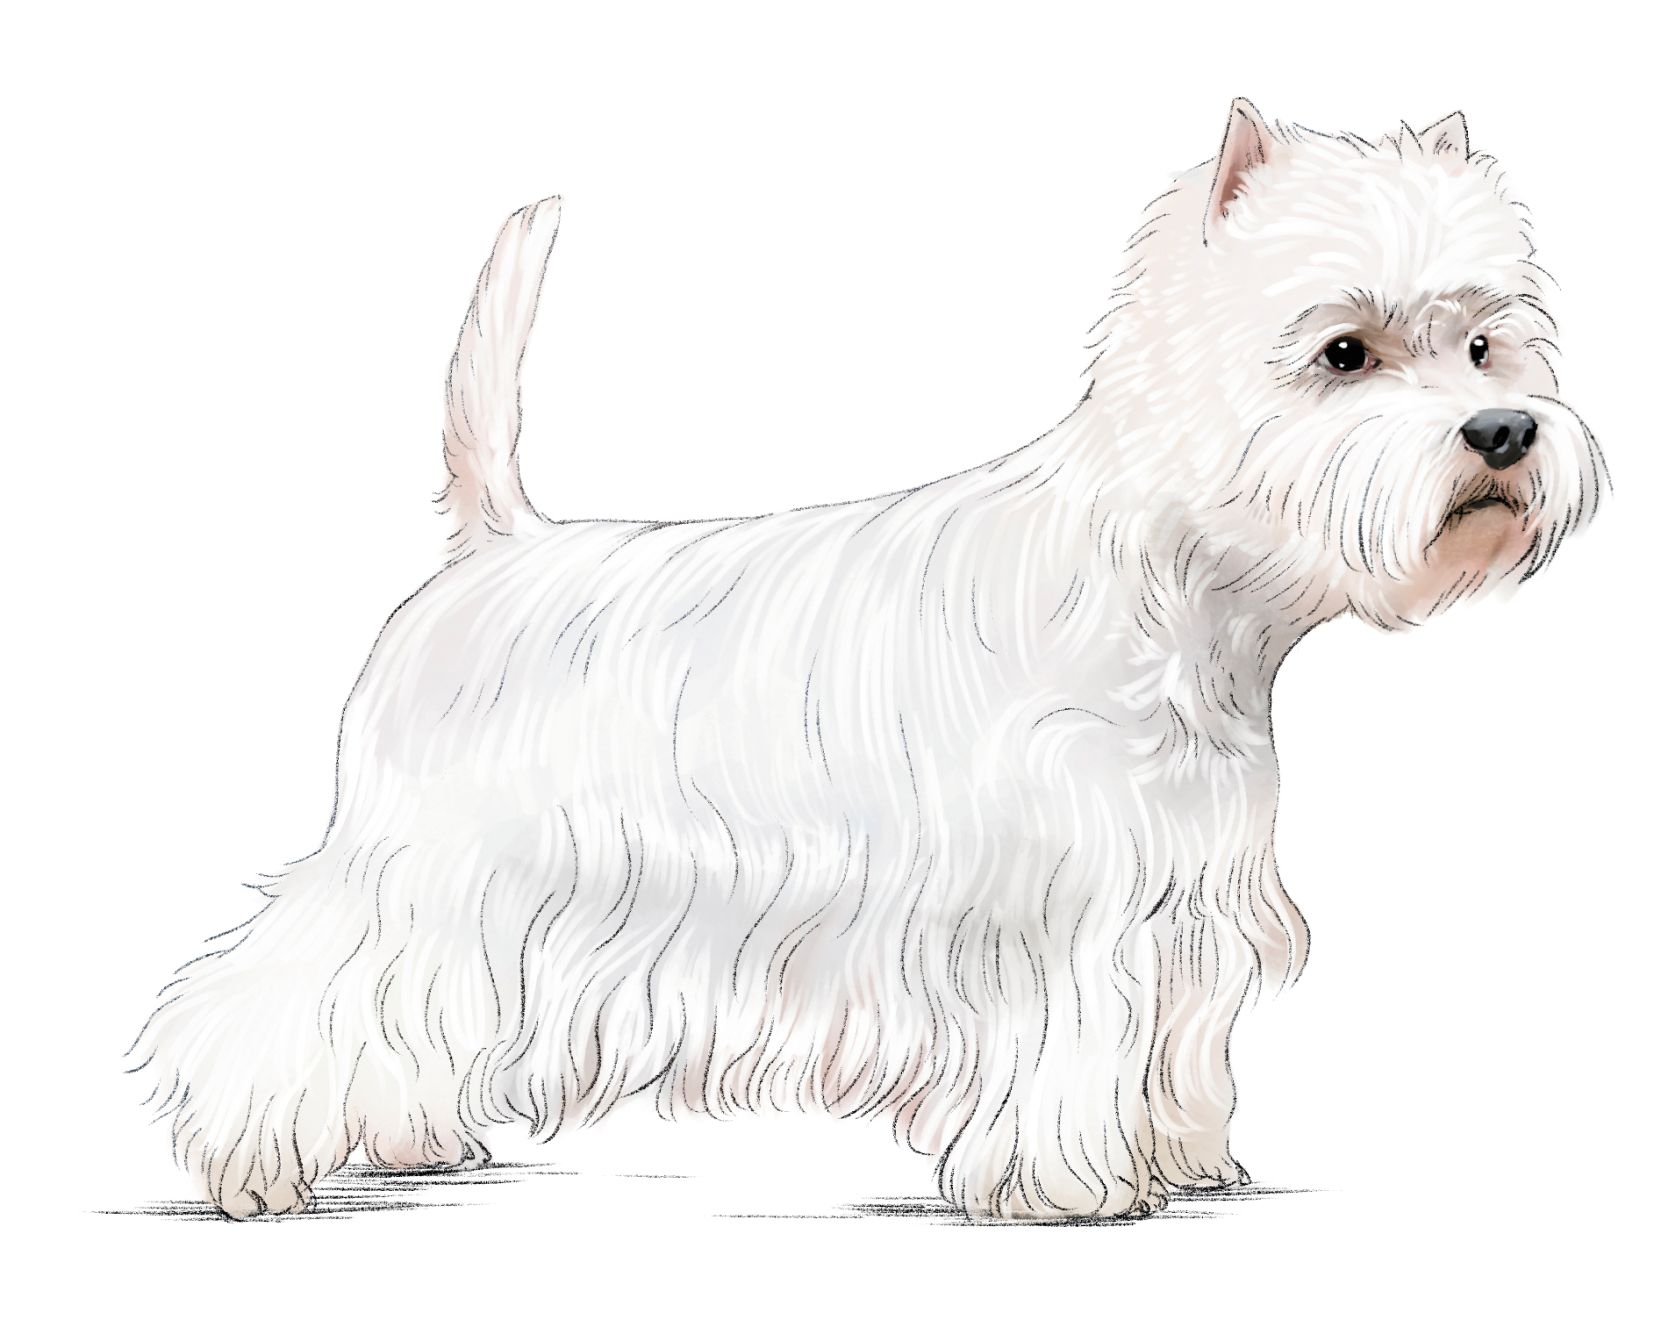 Illustrated side profile image of a standing West Highland White Terrier